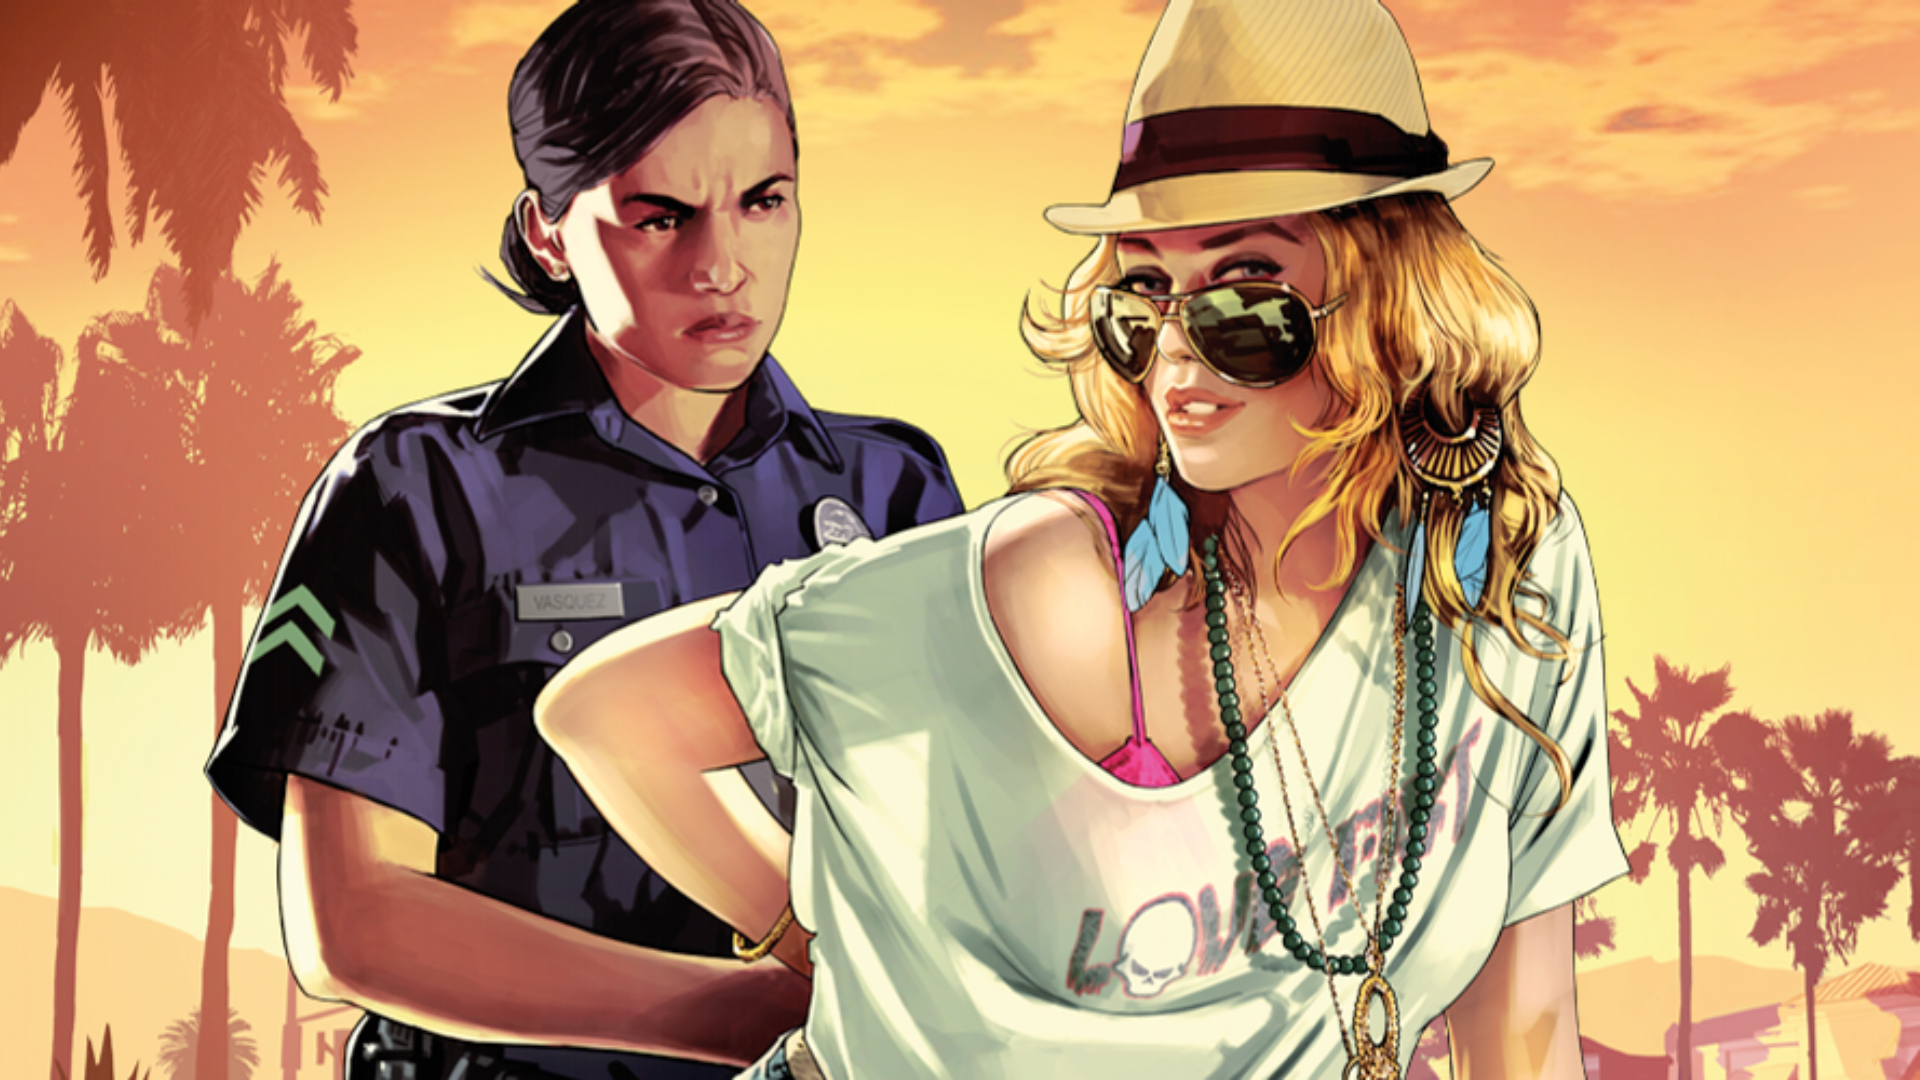 Rockstar Games uploaded a video premiere for the Grand Theft Auto